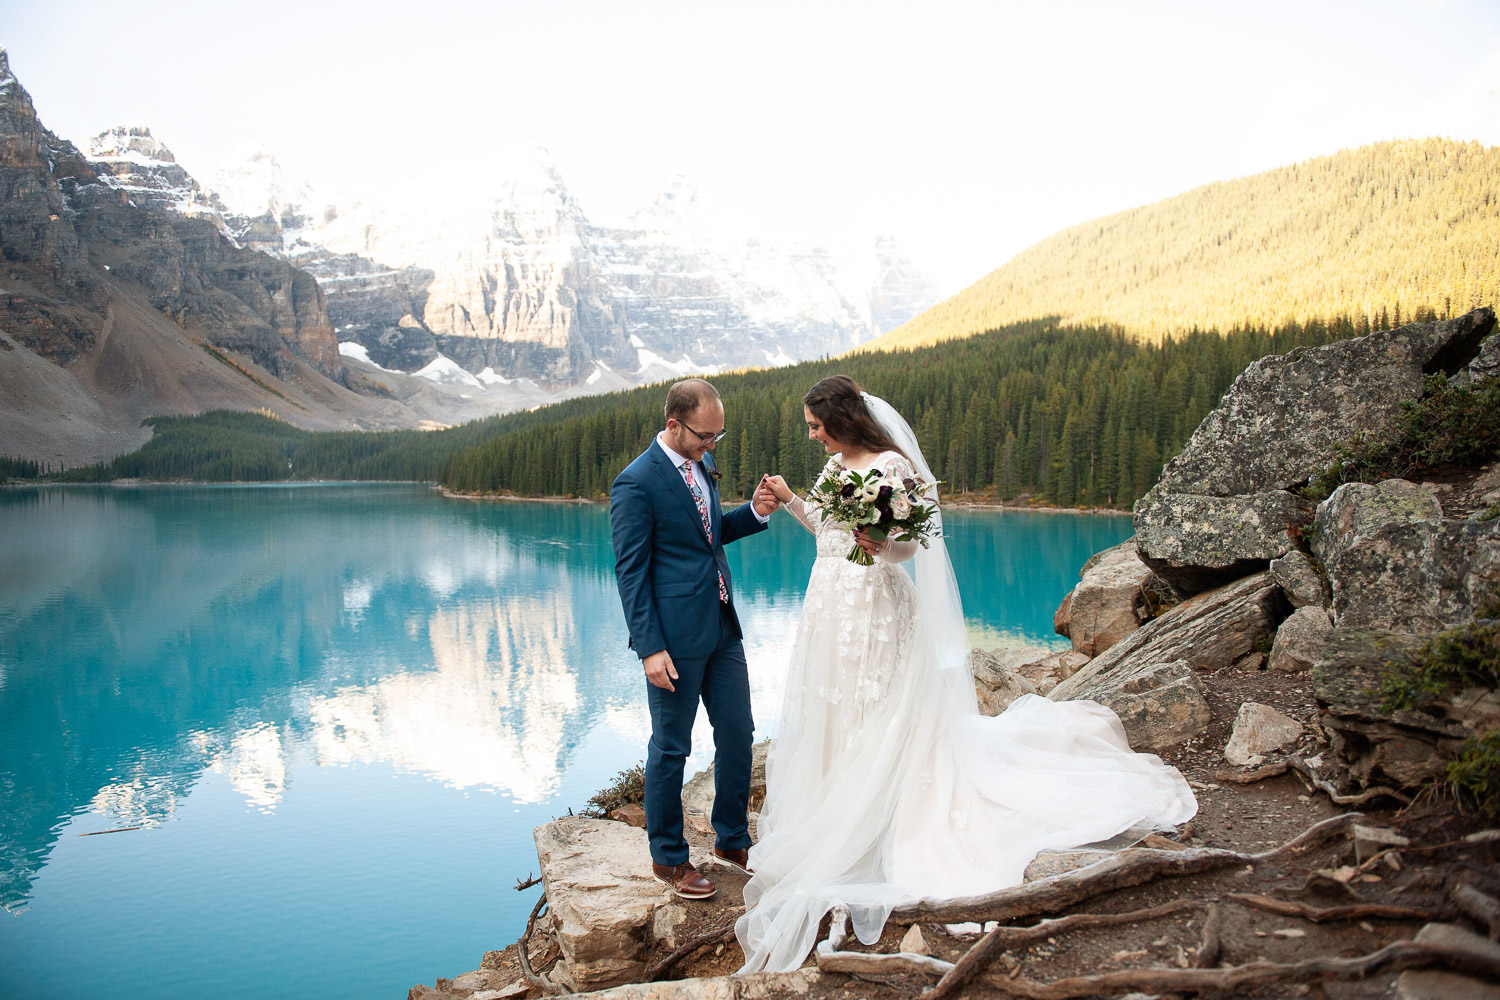 Bride and groom at Moraine Lake captured by Tara Whittaker Photography